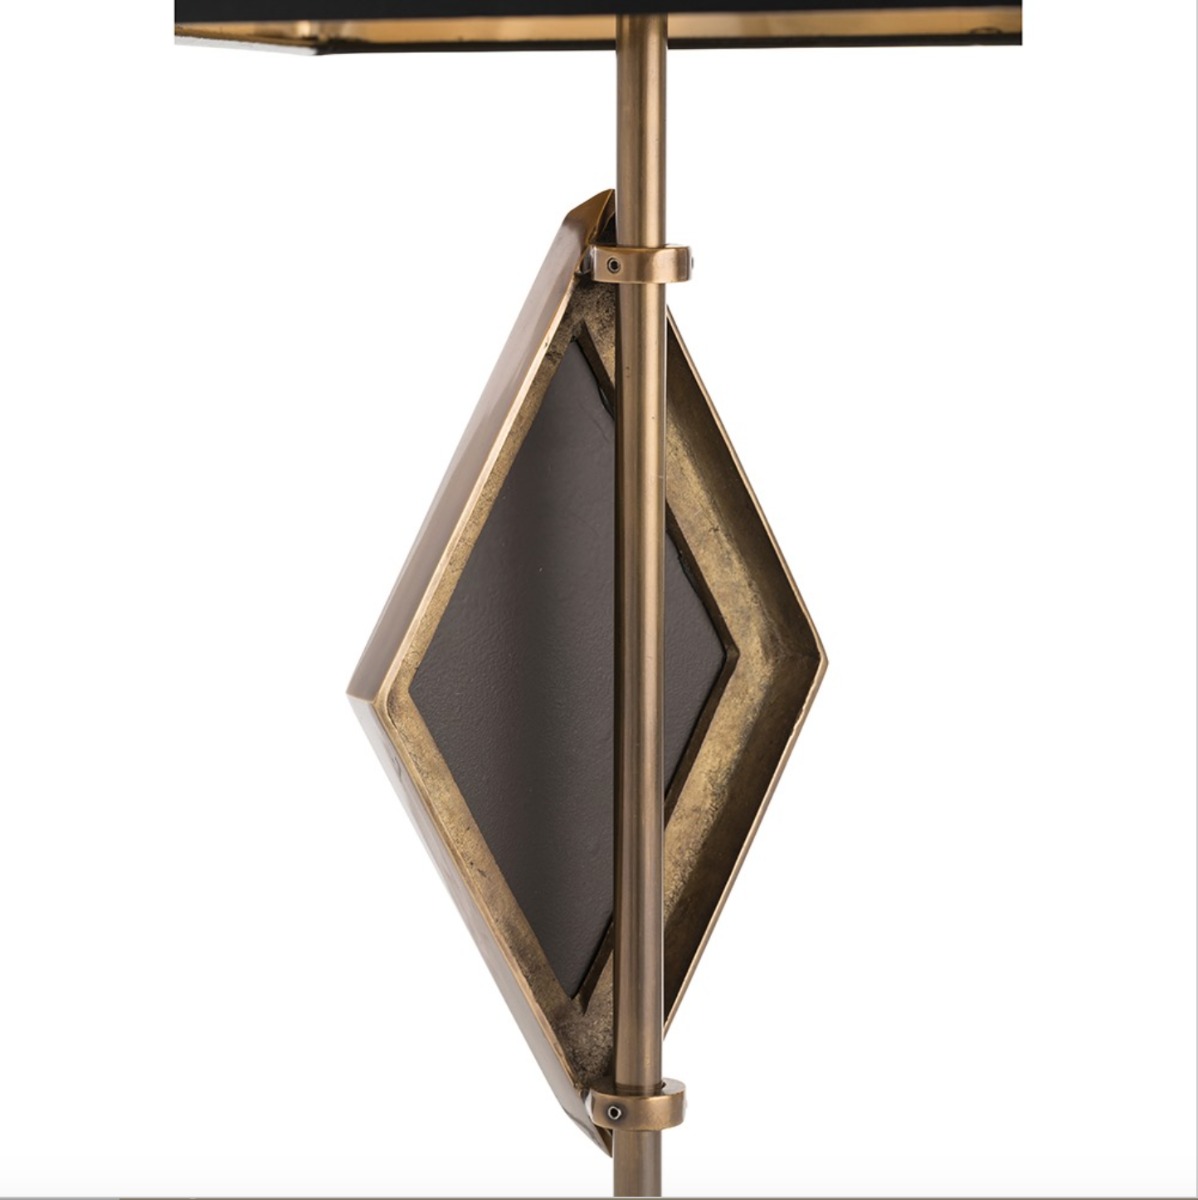 Luxury brass metal stand with diamond glass detail desk lamp from Luxuria London